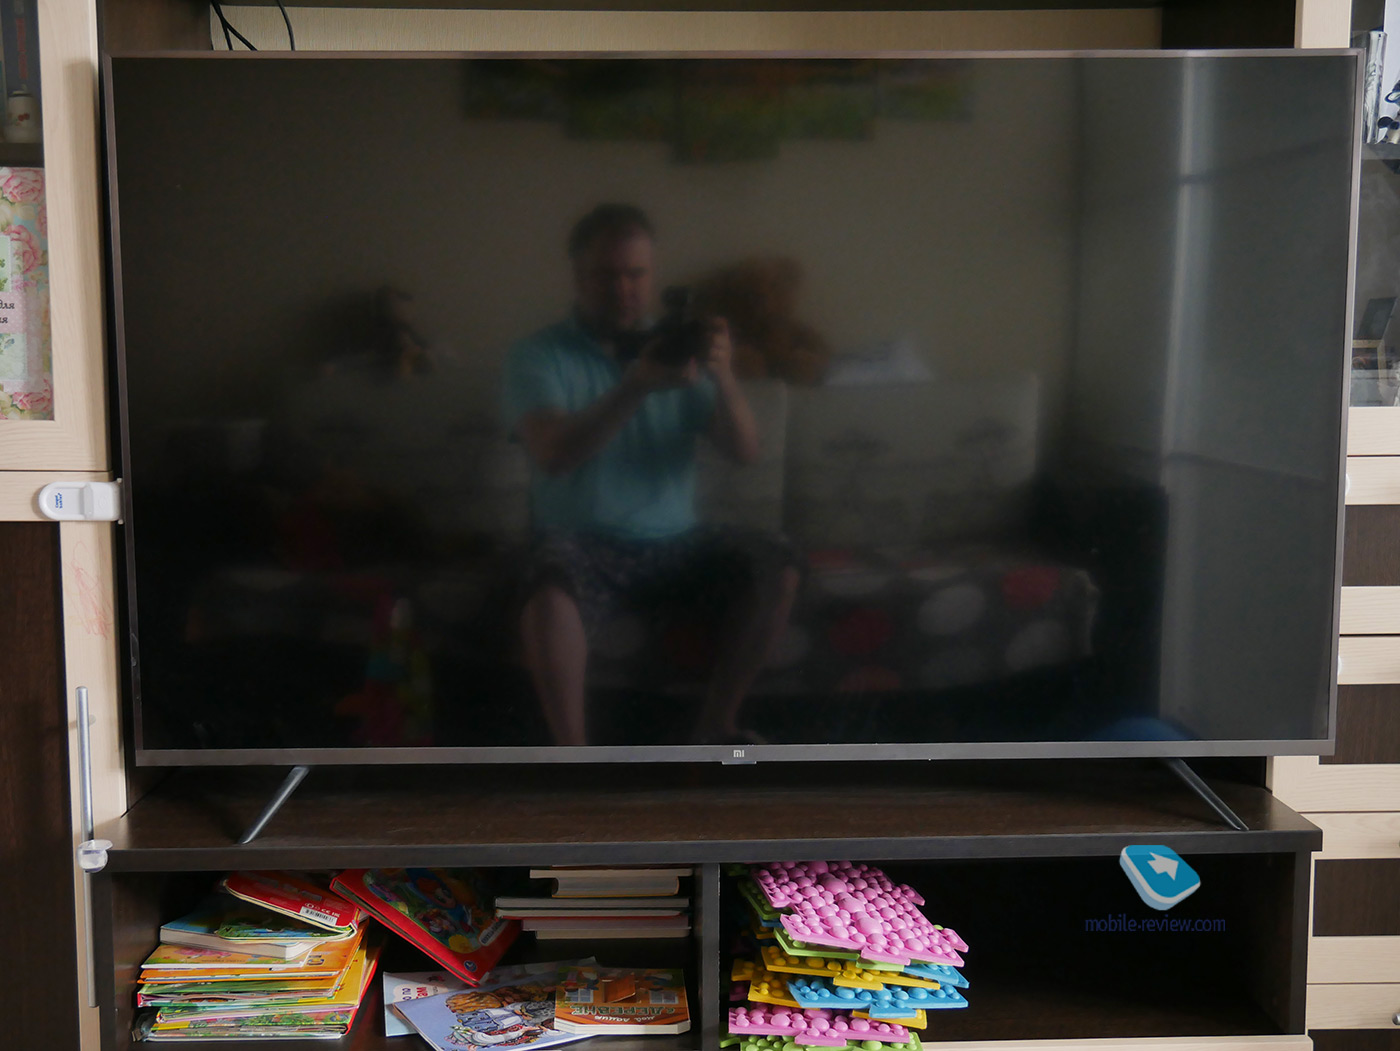 Experience of using Xiaomi Mi TV 4S at 55 inches